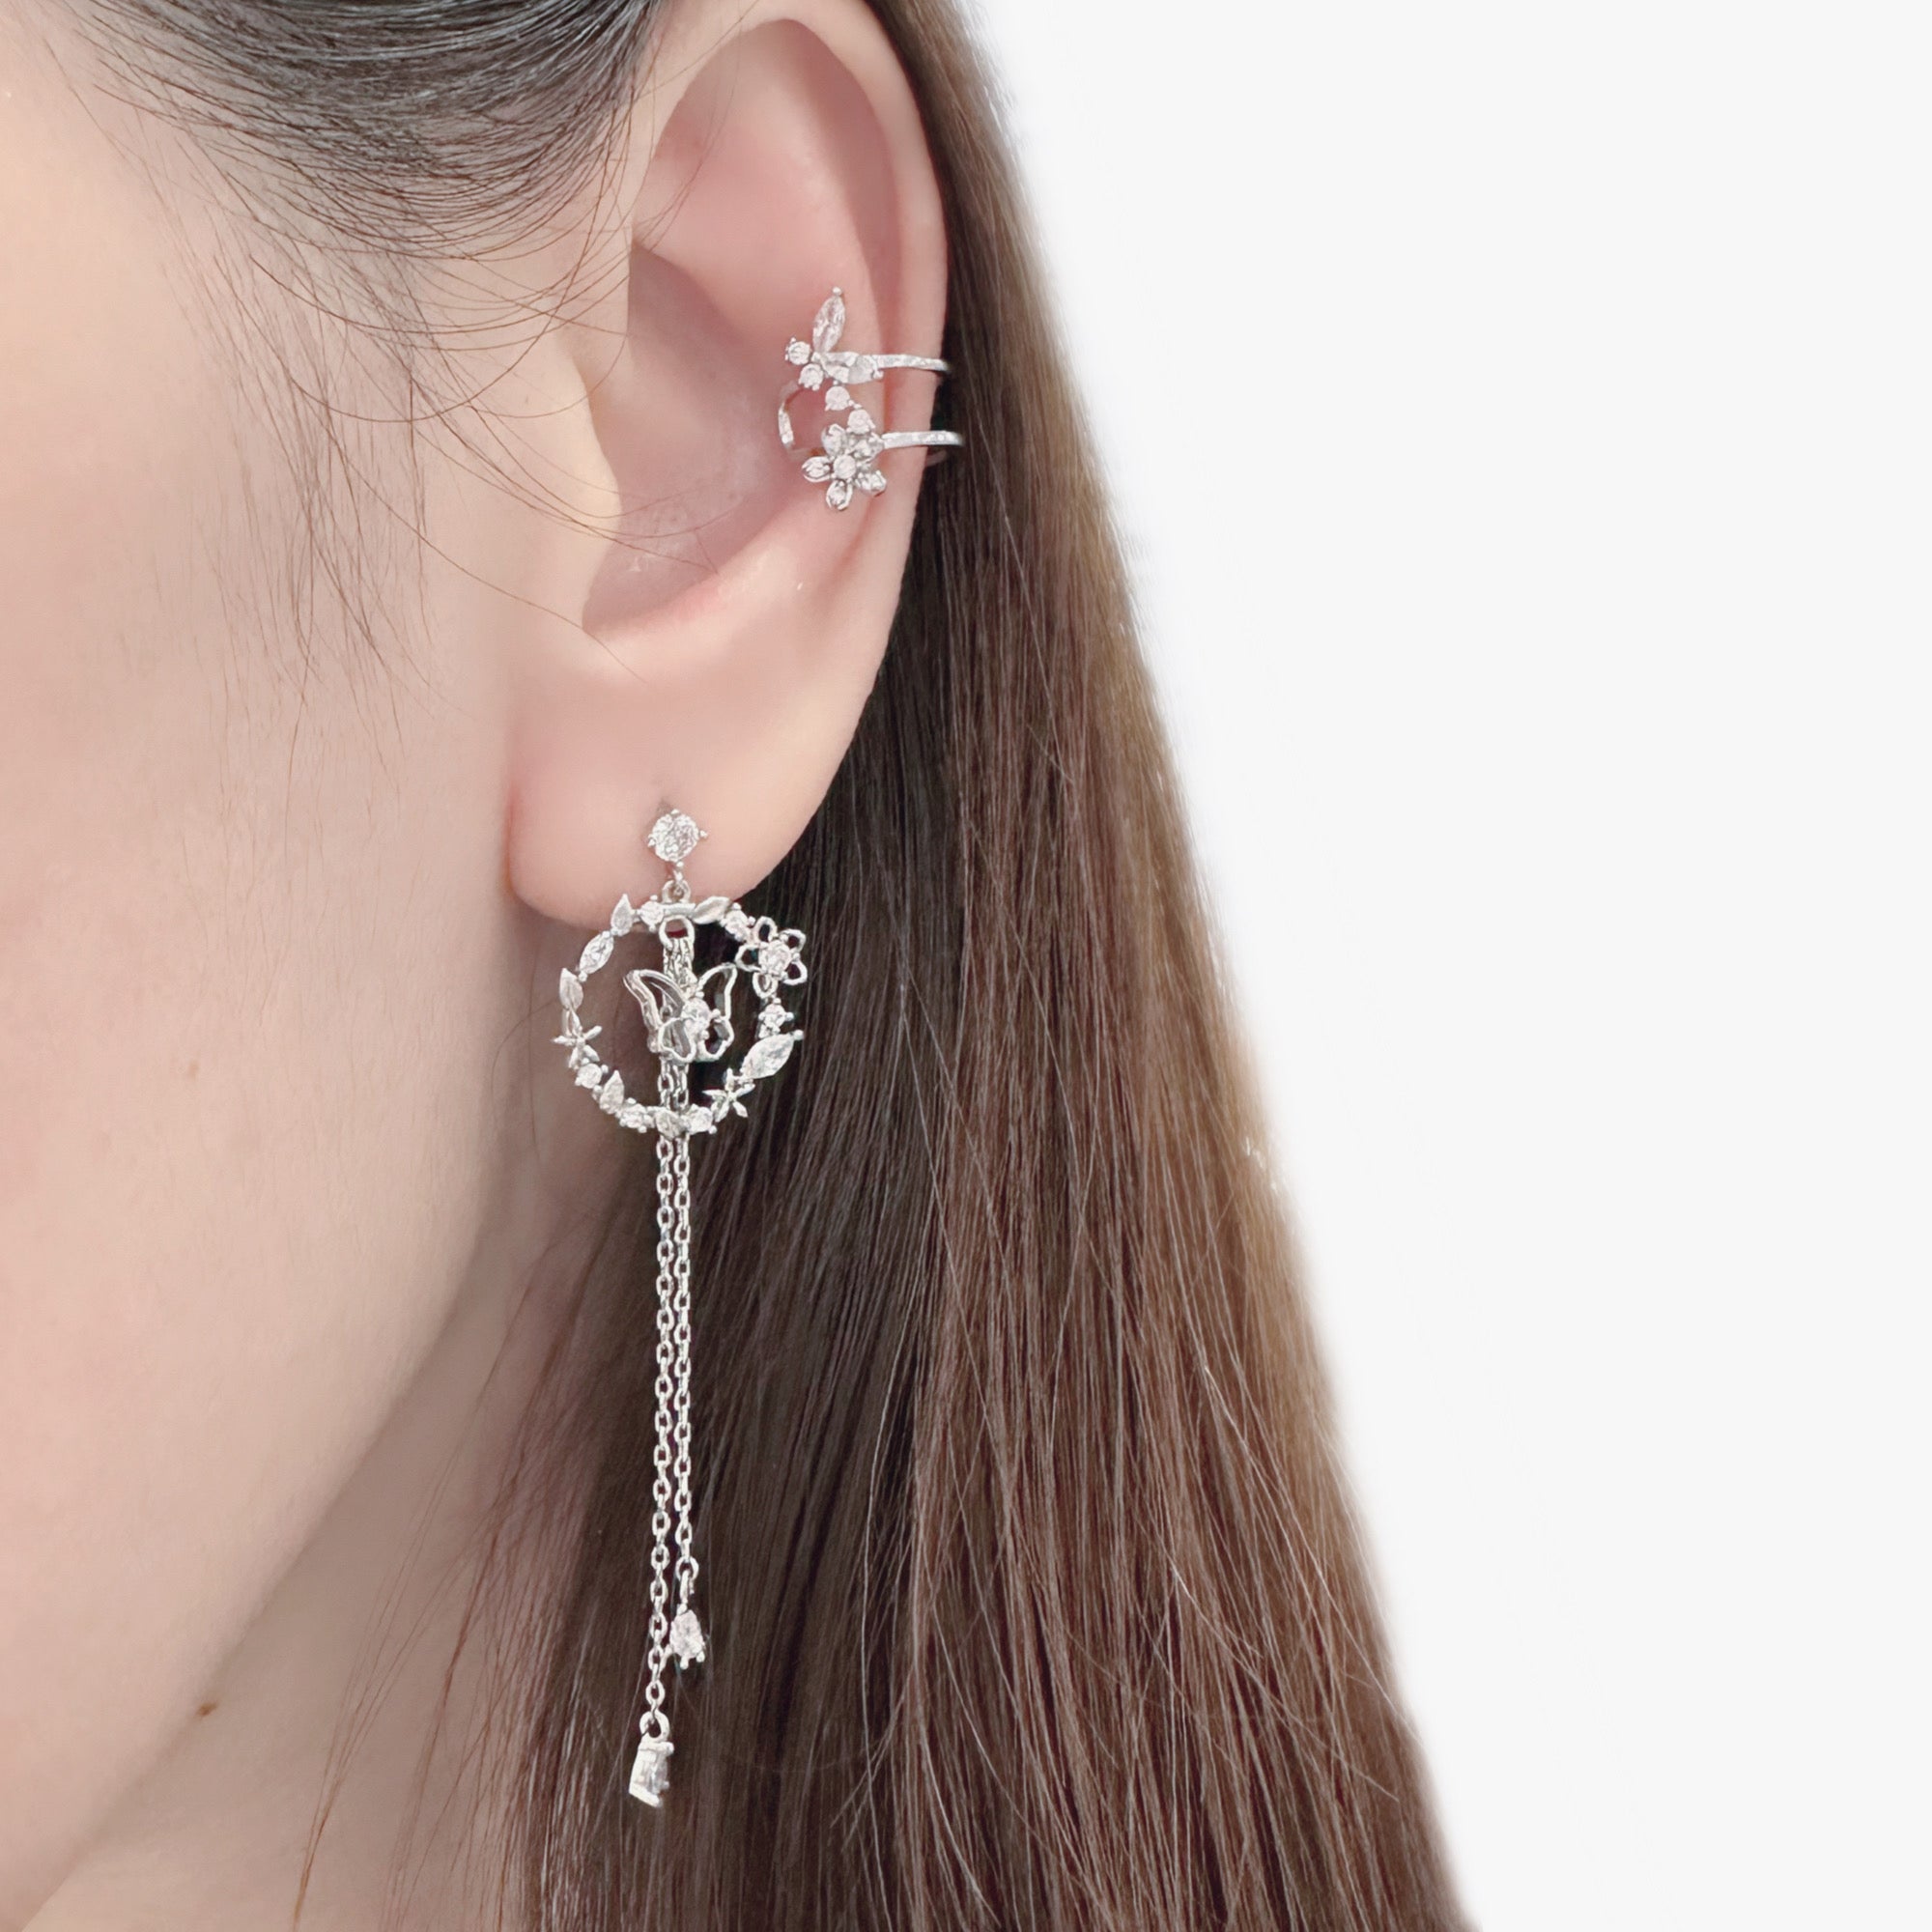 Rose Gold Made in Korea Earrings Korean Anting Cubic Zirconia Jewellery Malaysia Instagram 925 Sterling Silver hypoallergenic Instagram gift shops Jewellery Online Malaysia Shopping No Piercing Perfect Gift special gift Loved One Online jewellery Malaysia Gift for her Rose Gold Korea Made Earrings Korean Jewellery Jewelry Local Brand in Malaysia Cubic Zirconia Dainty Delicate Minimalist Jewellery Jewelry Bride Clip On Earrings Silver Gift Set present gift for her gift ideas earcuff ear cuff non piercing